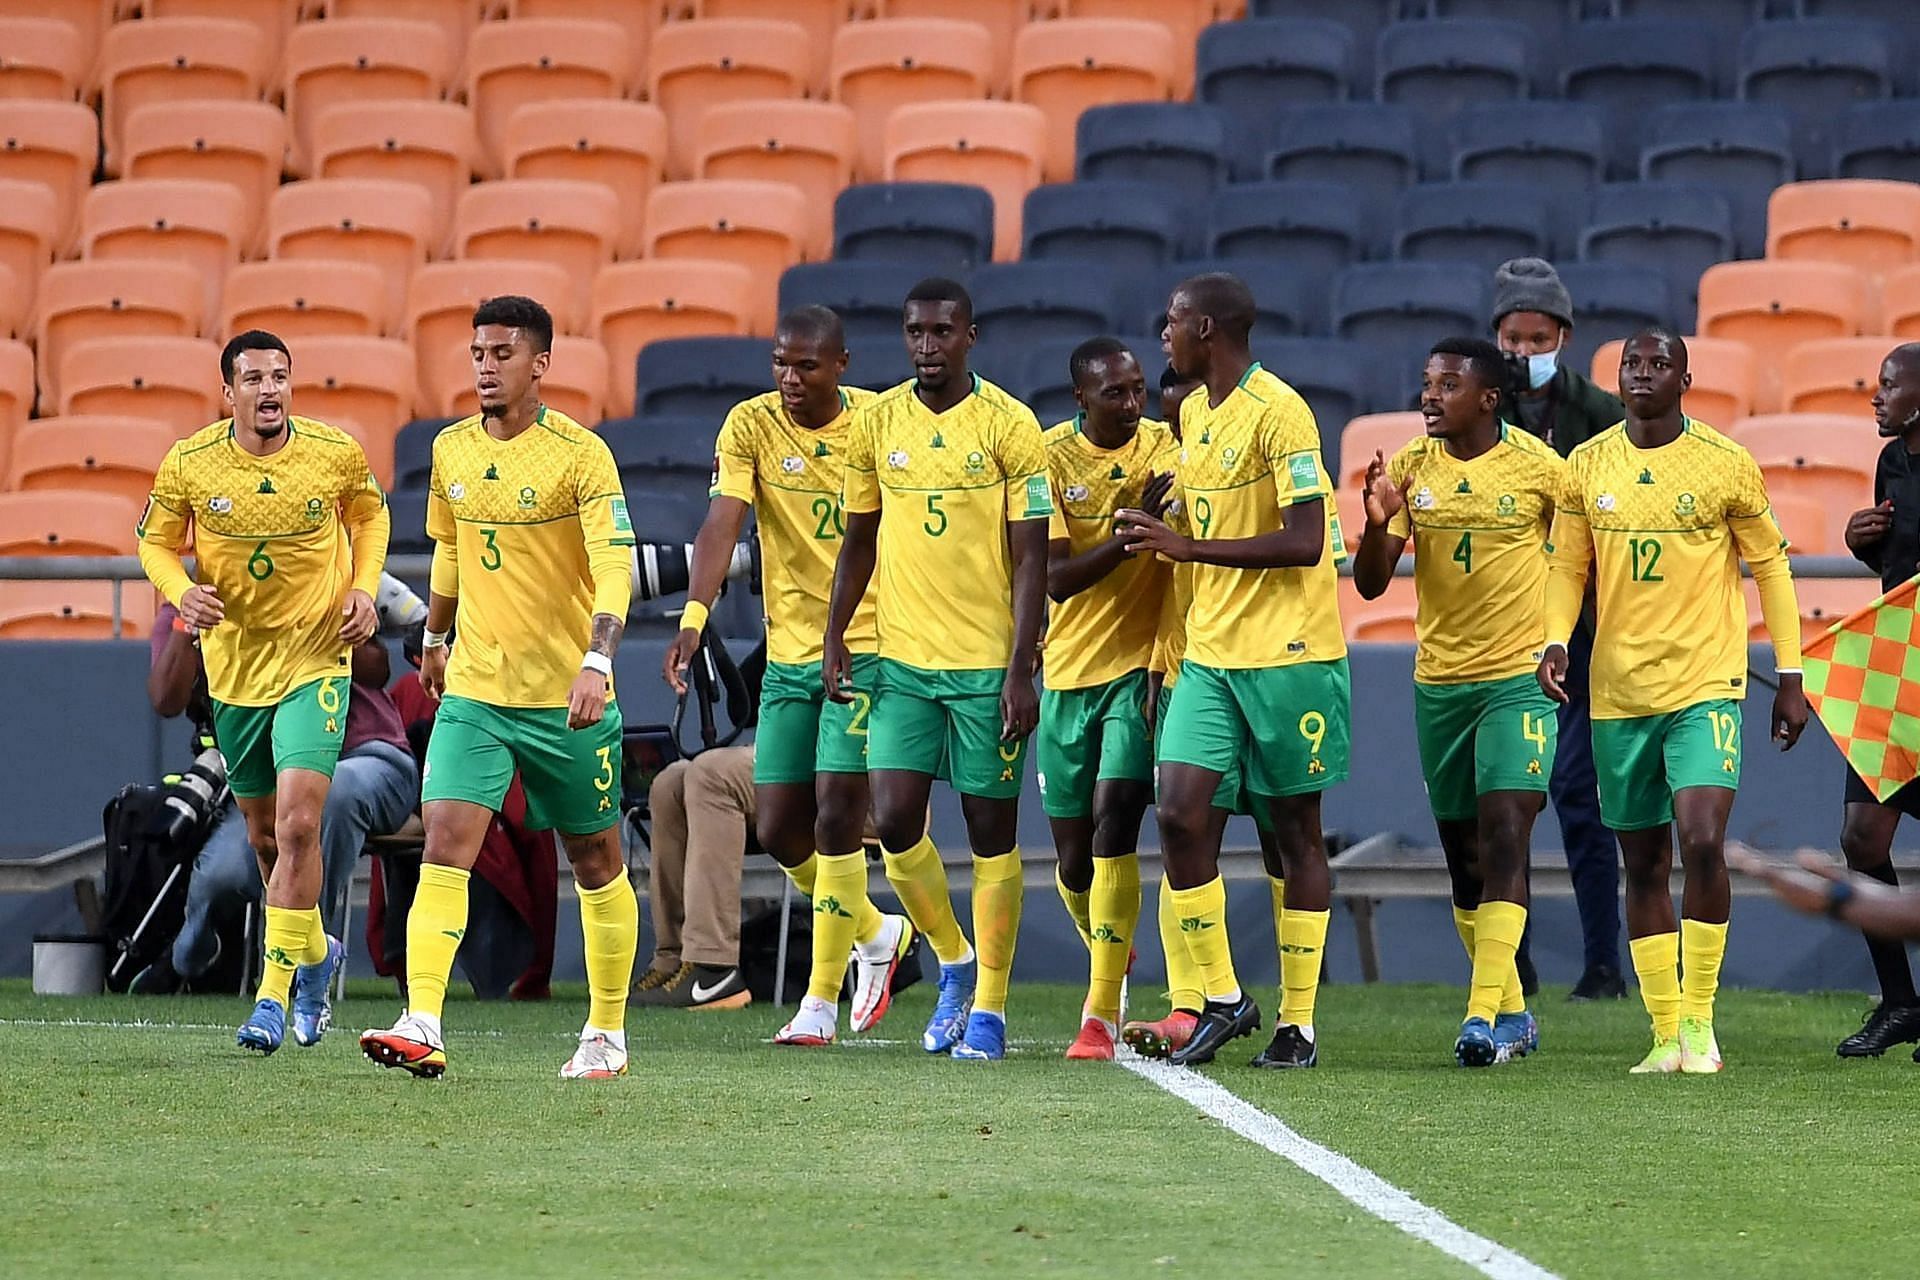 South Africa will face Eswatini on Friday 